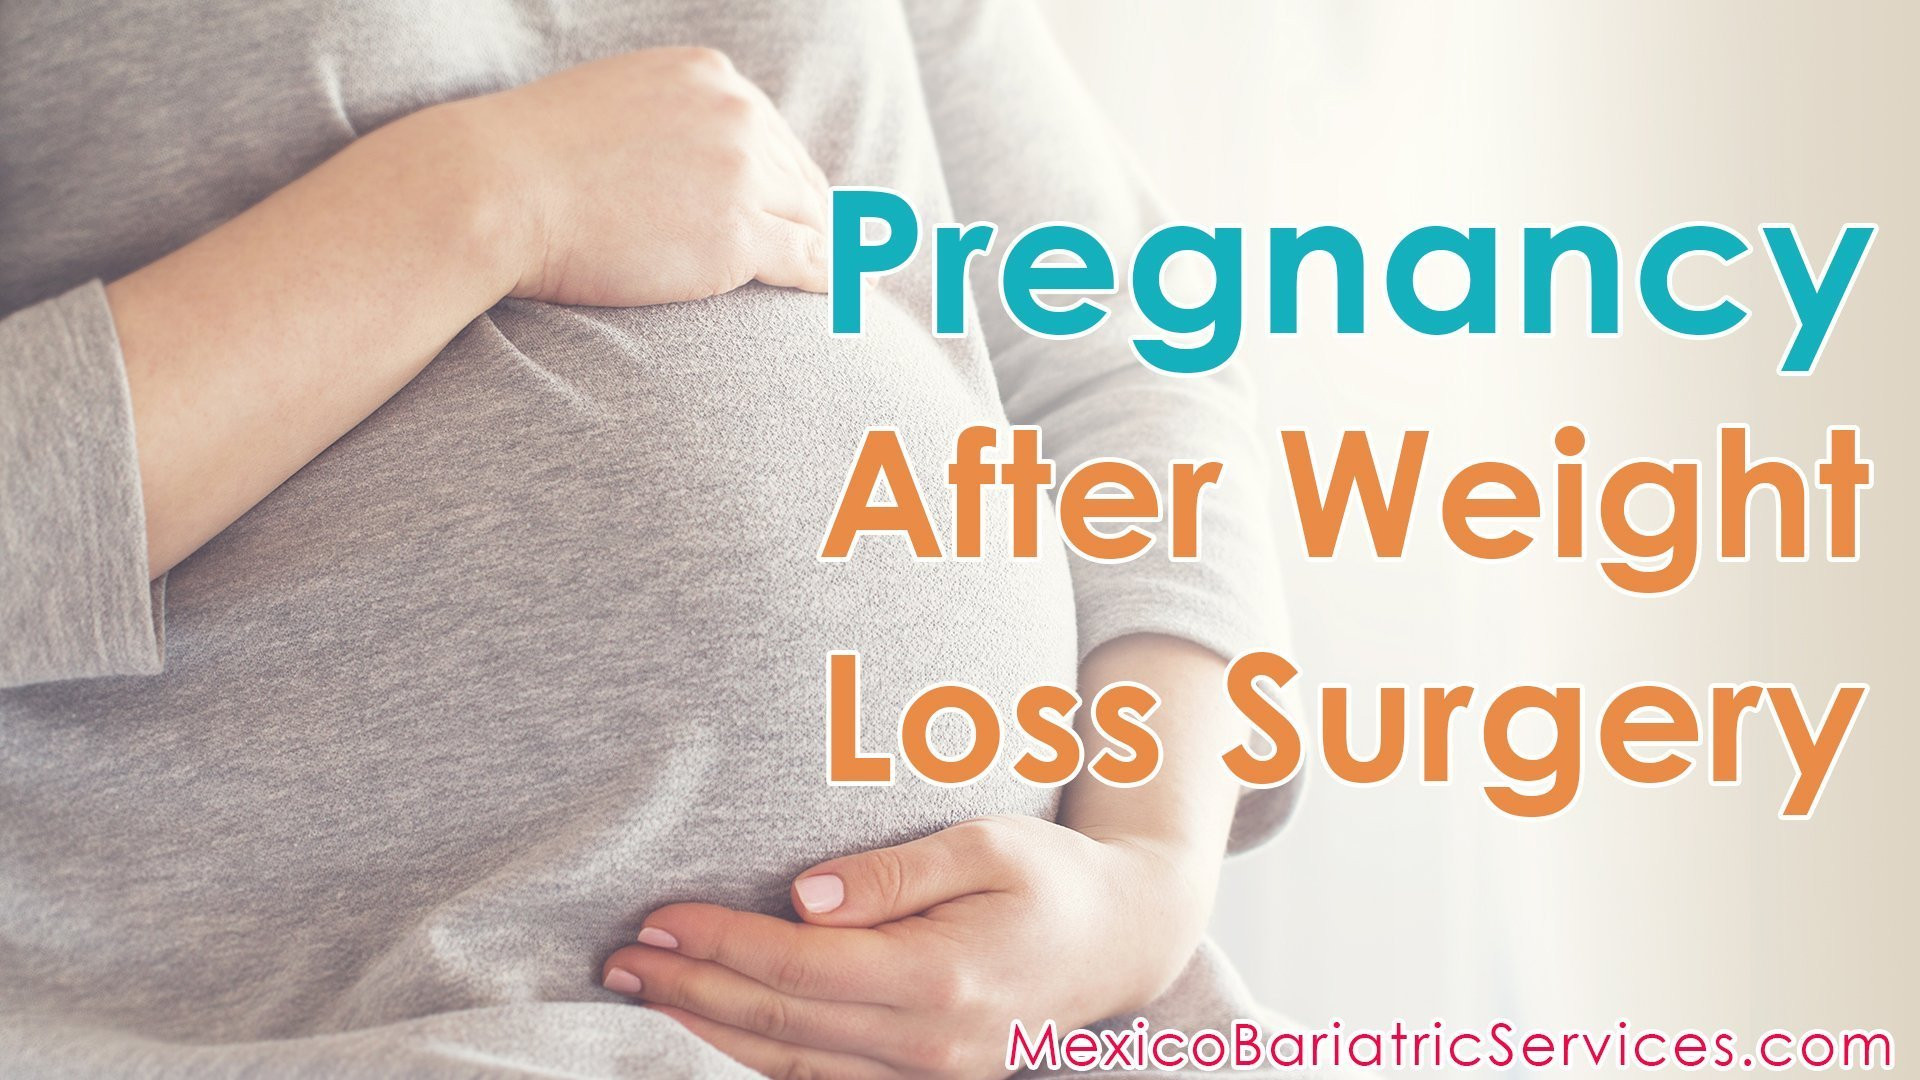 Pregnancy After Weight Loss Surgery
 Guidelines for Pregnancy After WLS